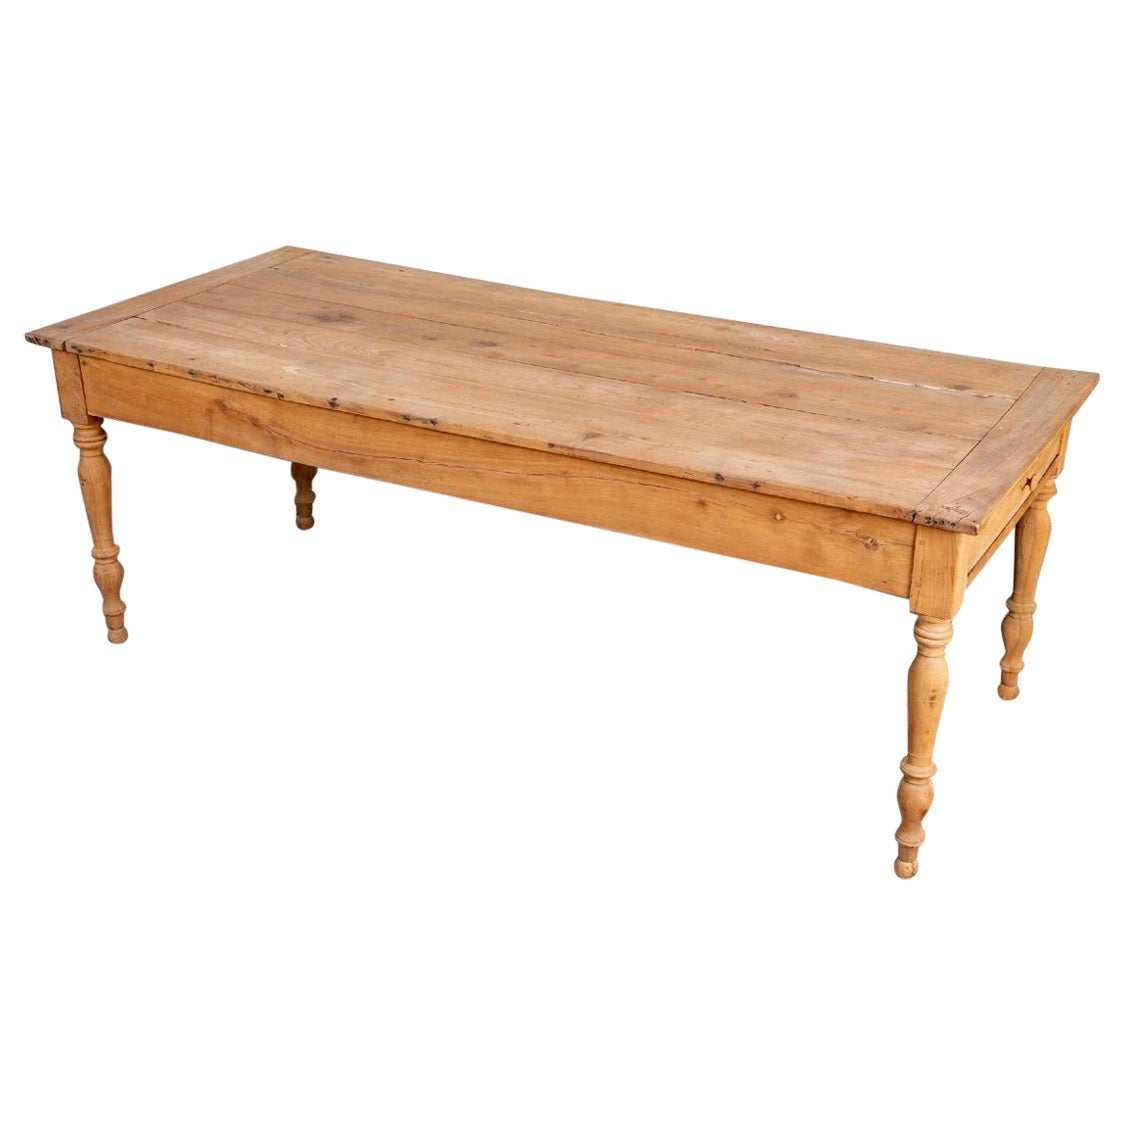 Farm Table - Solid Cherry Wood - Made In Normandy - Period : XVIIIth Century